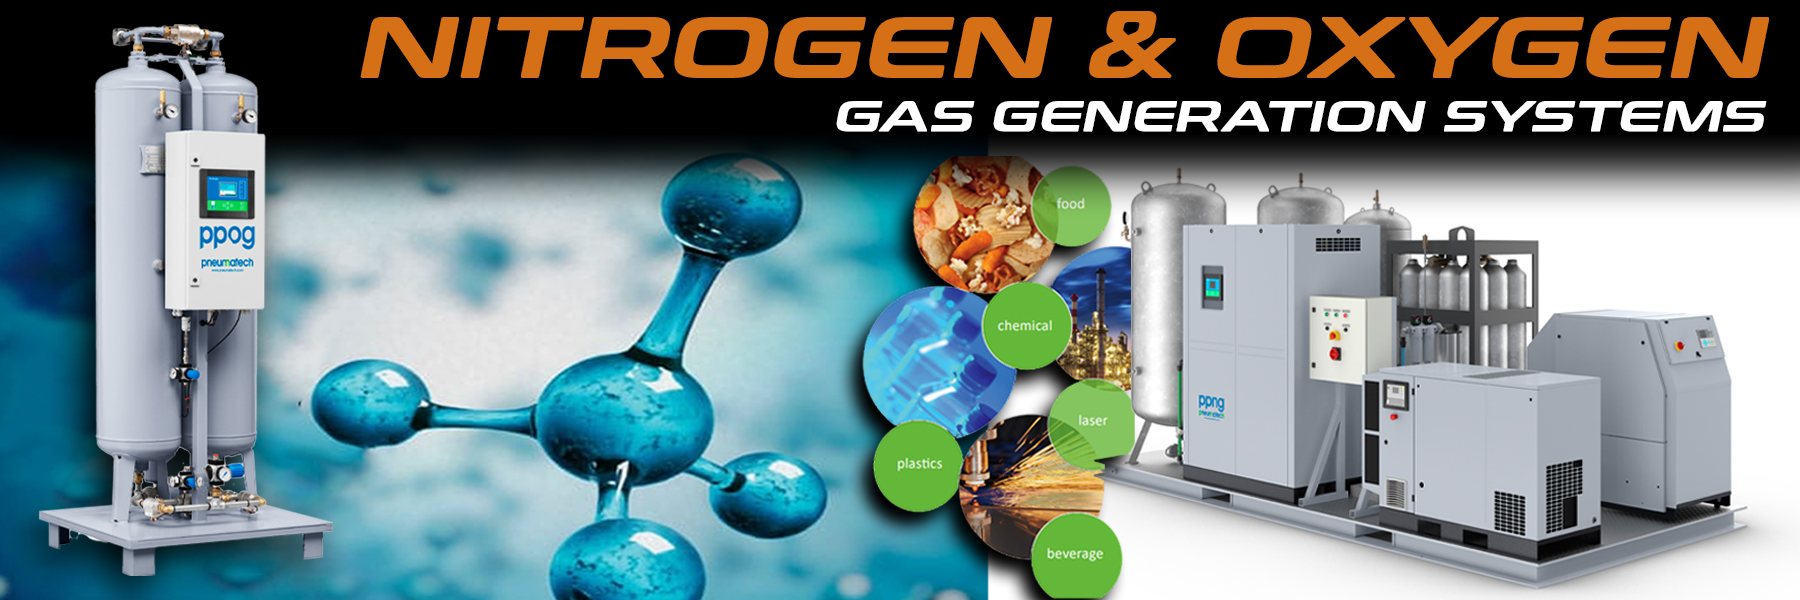 Nitrogen and Oxygen Generation Systems